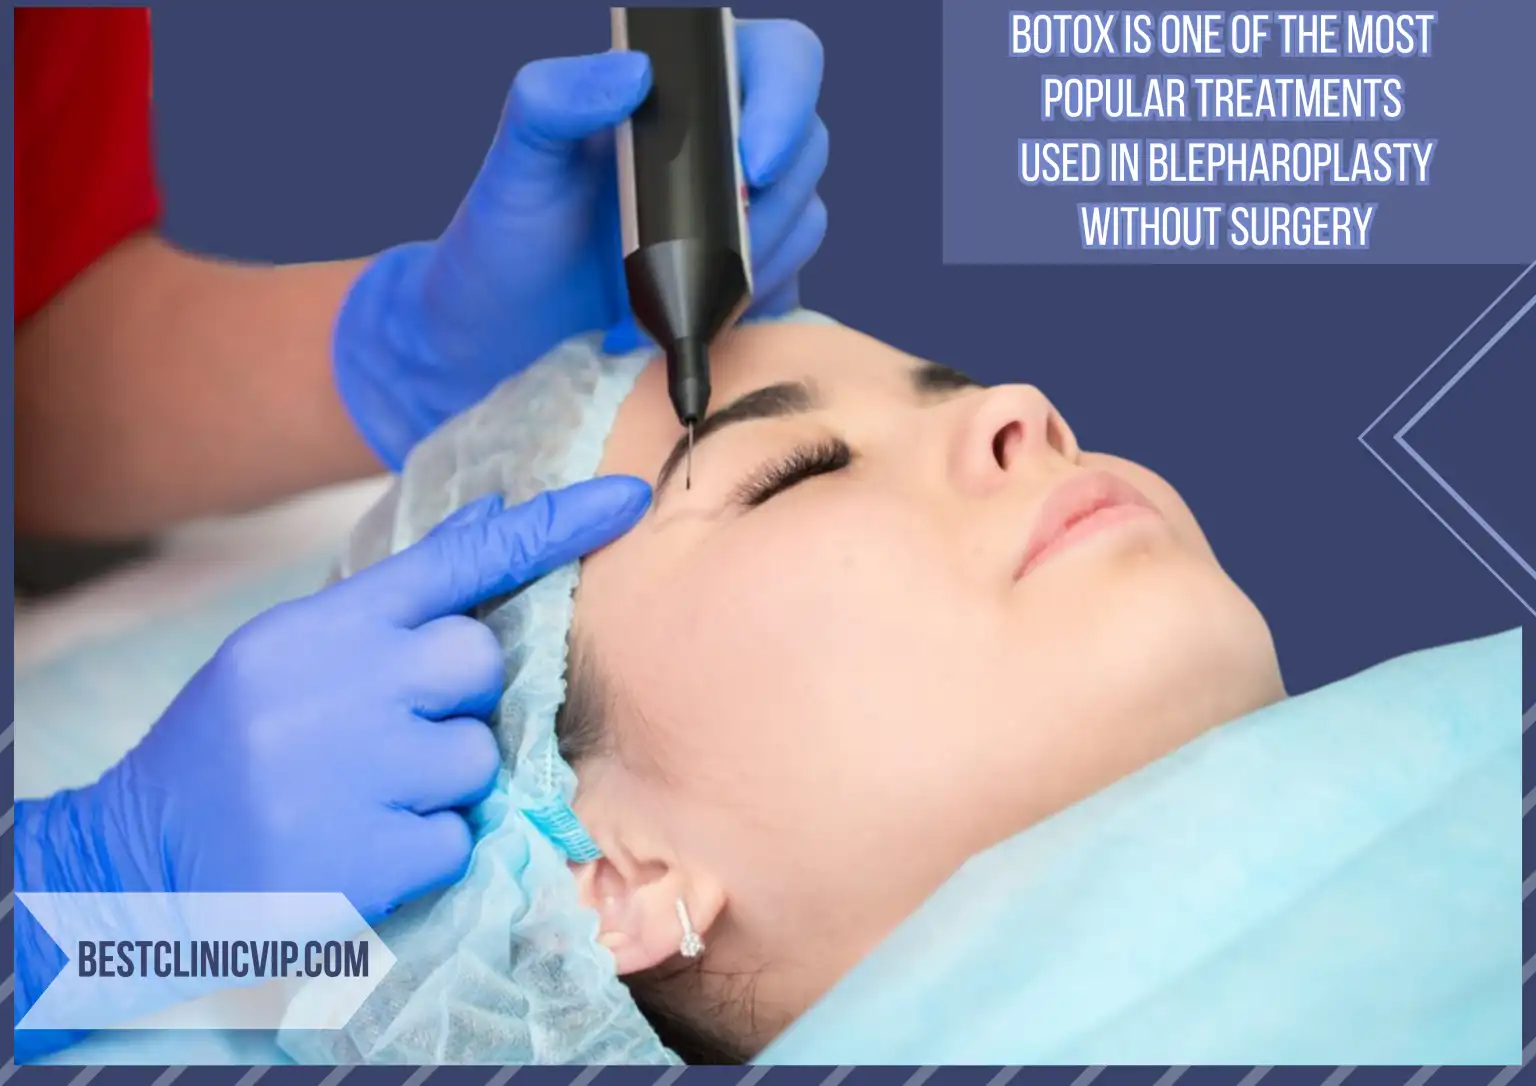 Botox is one of the most popular treatments used in blepharoplasty without surgery